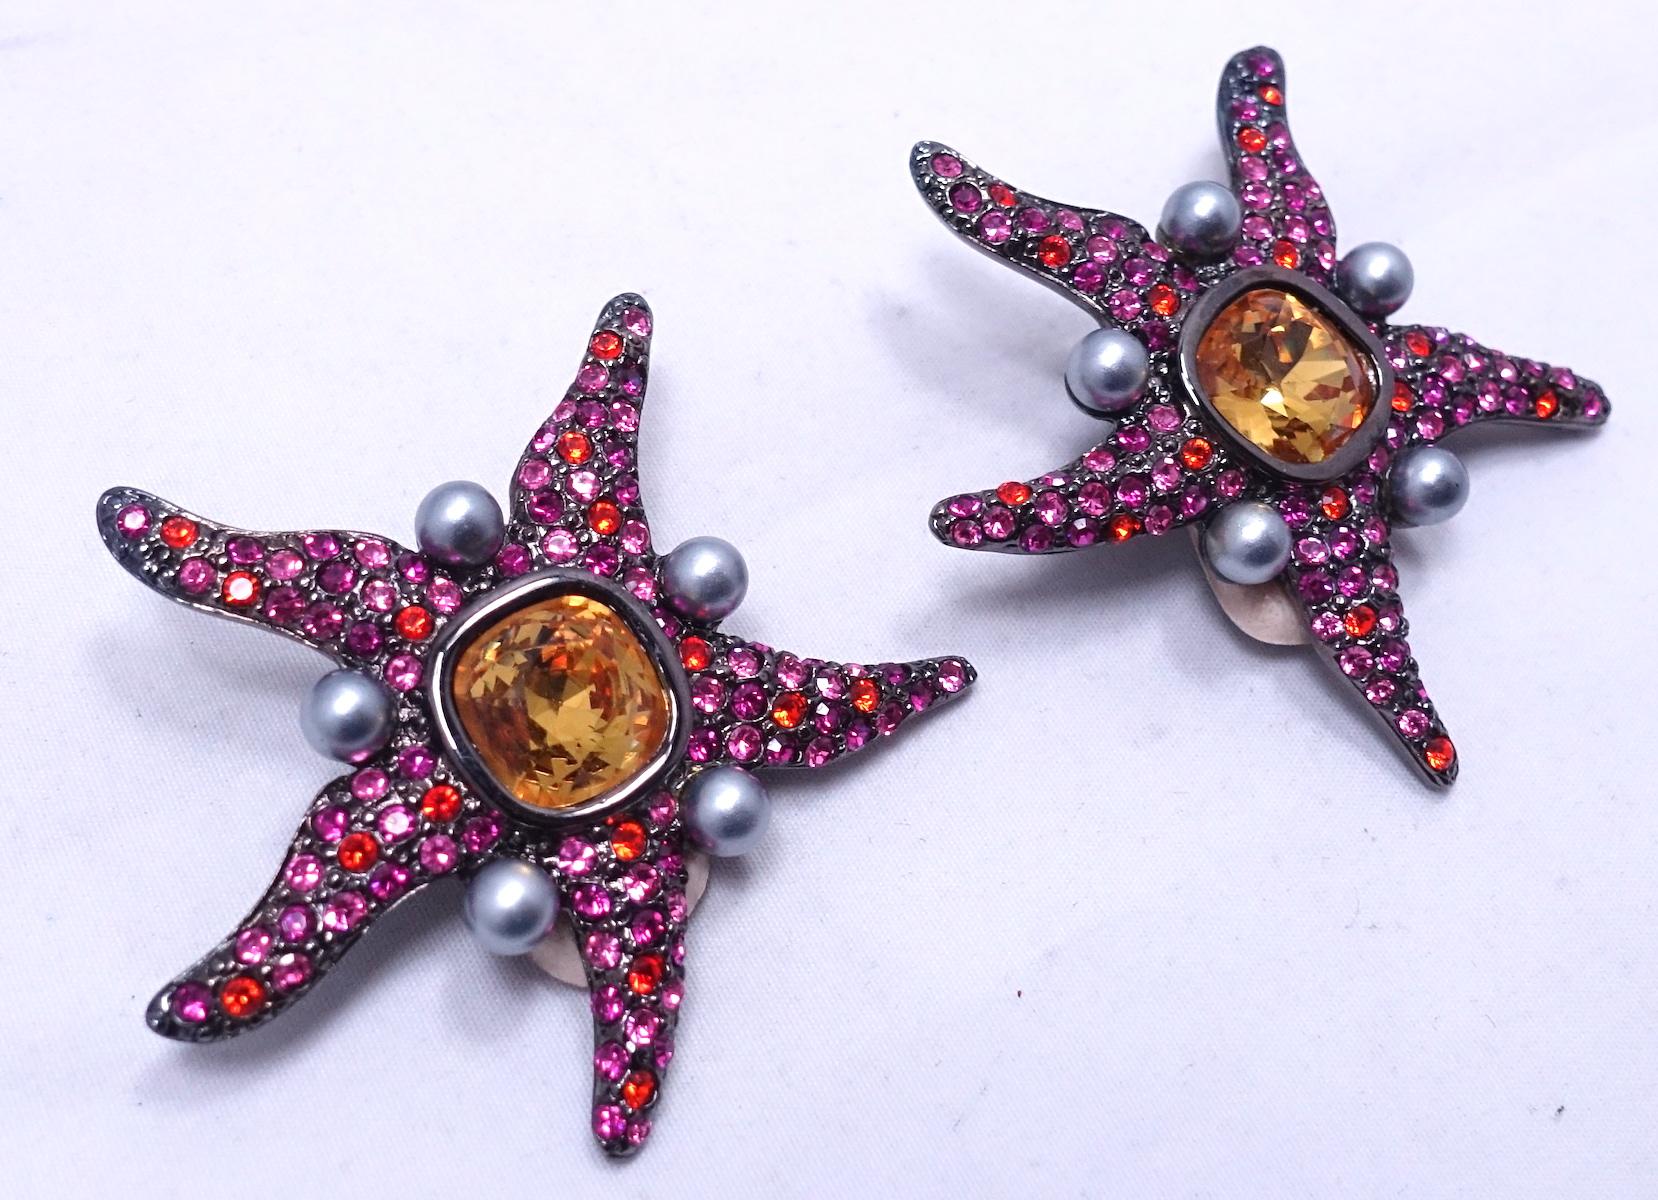 These signed Kenneth Lane starfish earrings are made with pink and citrine color crystals in a japanned setting.  In excellent condition, these earrings measure 2” in diameter and are signed “Kenneth Lane”.